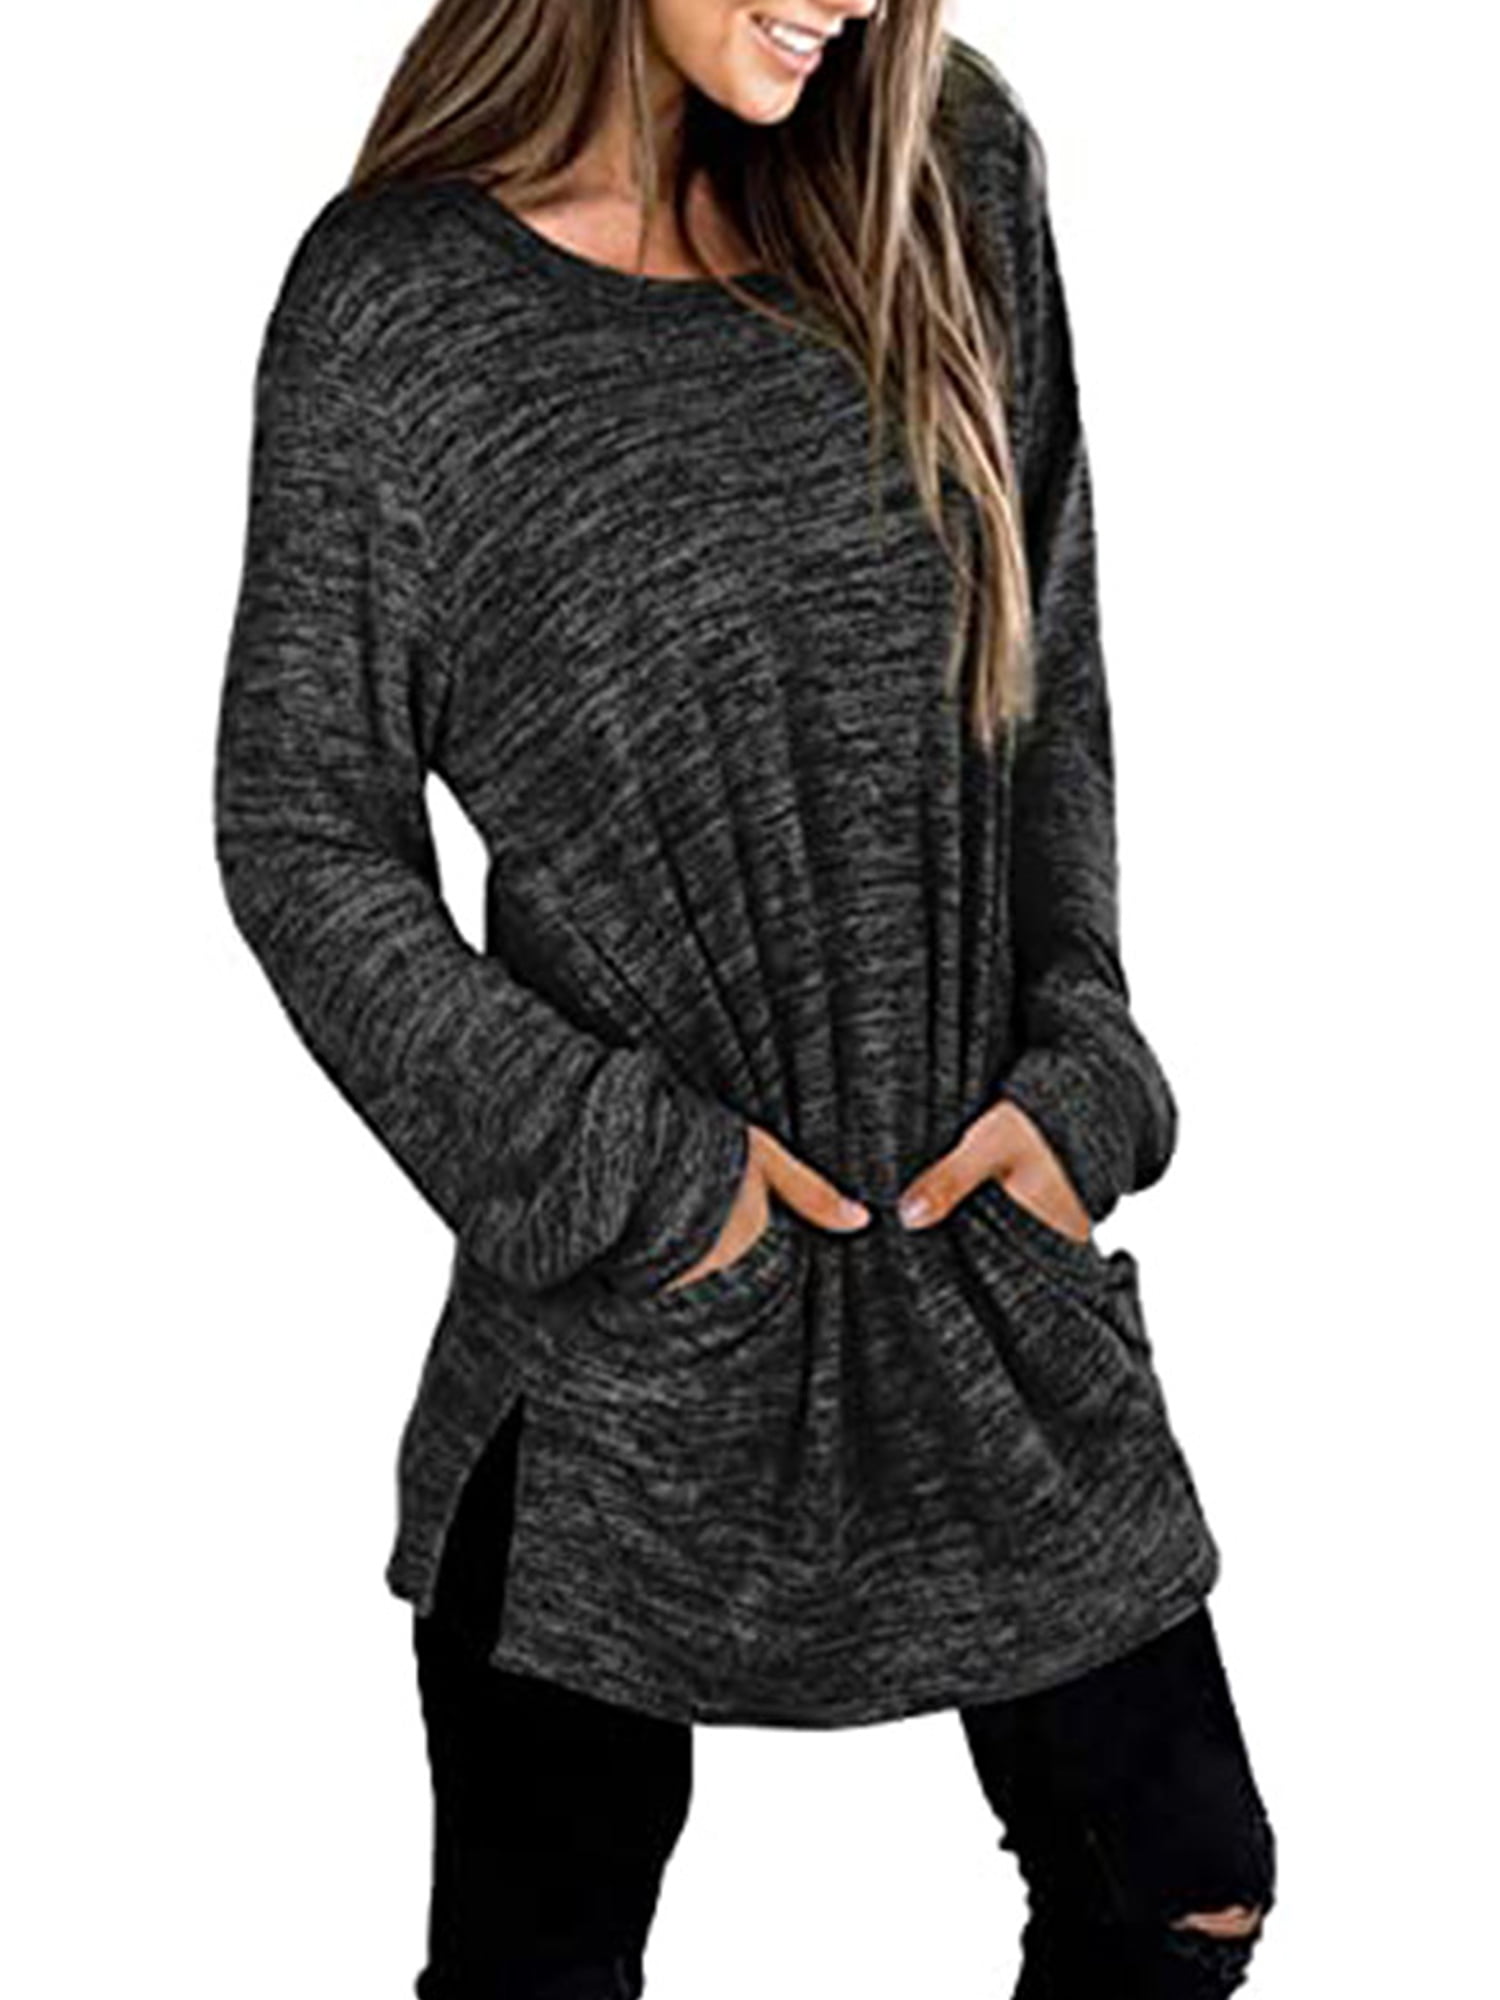 Long Sleeve Tunics for Women to Wear with Leggings Take Me to The Mountains Tshirt Fall Loose Crewneck Flowy Tops